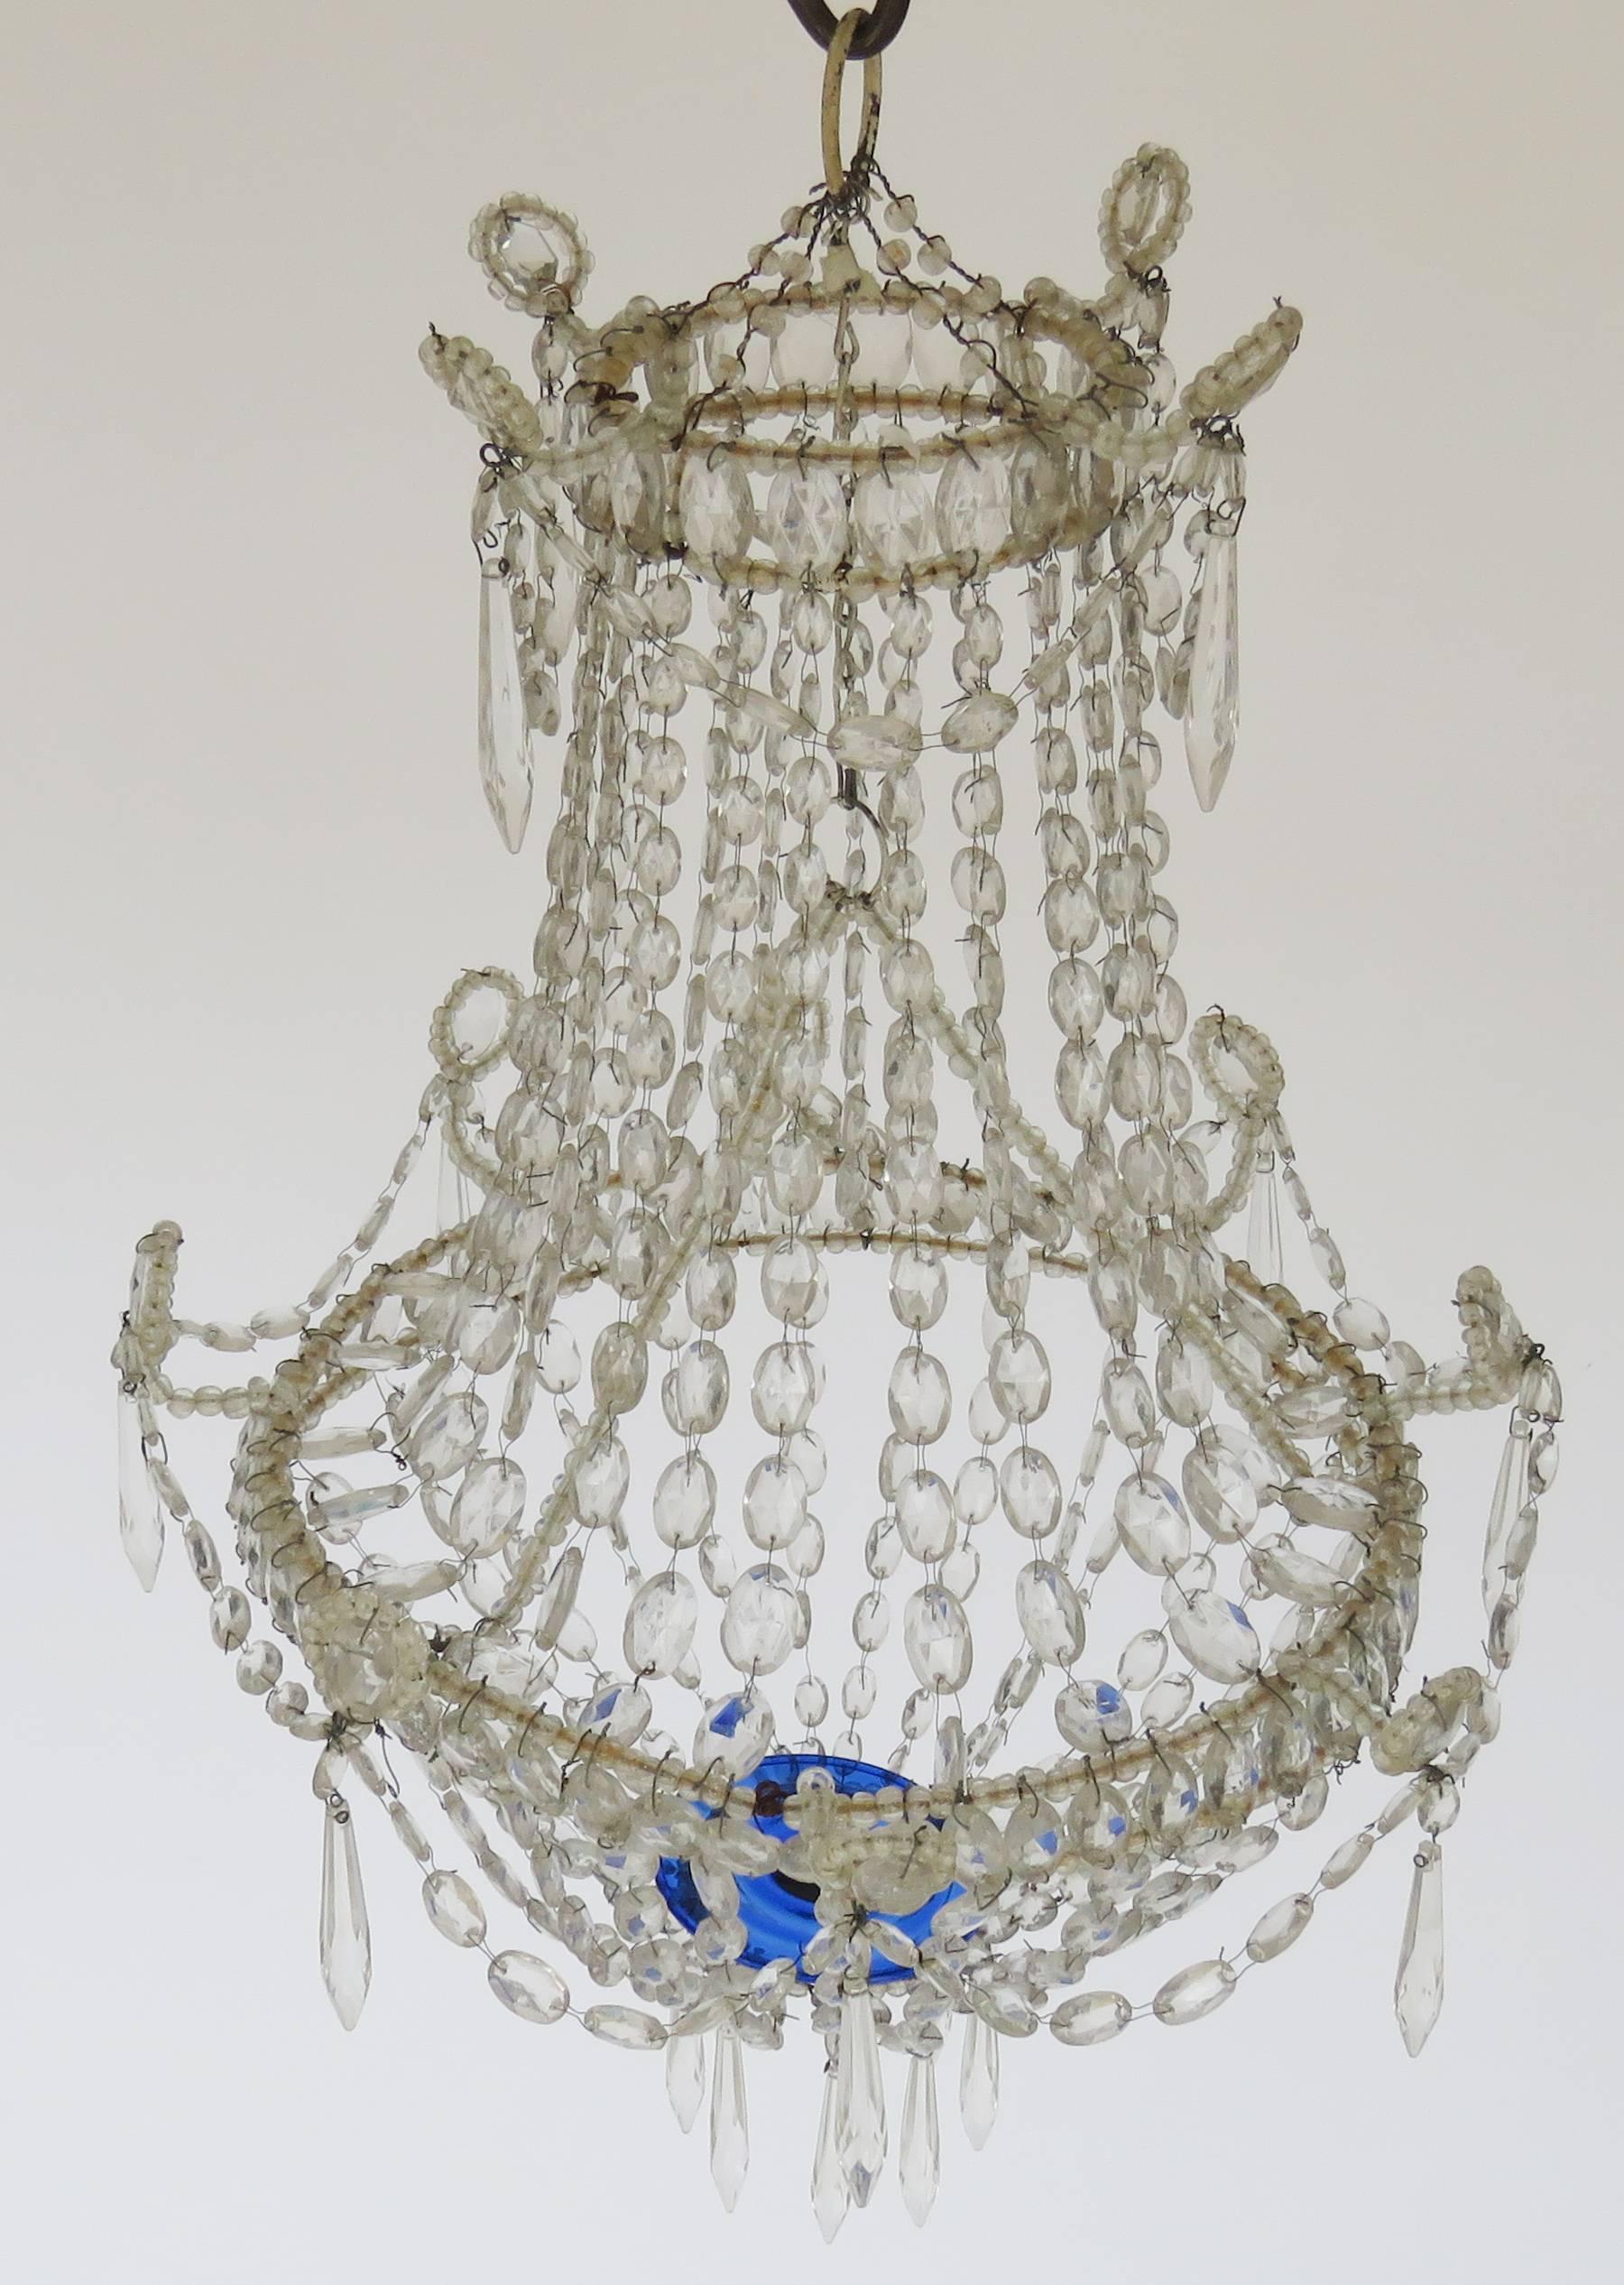 Hand-Crafted 19th Century Neoclassical Crystal Basket Chandelier For Sale